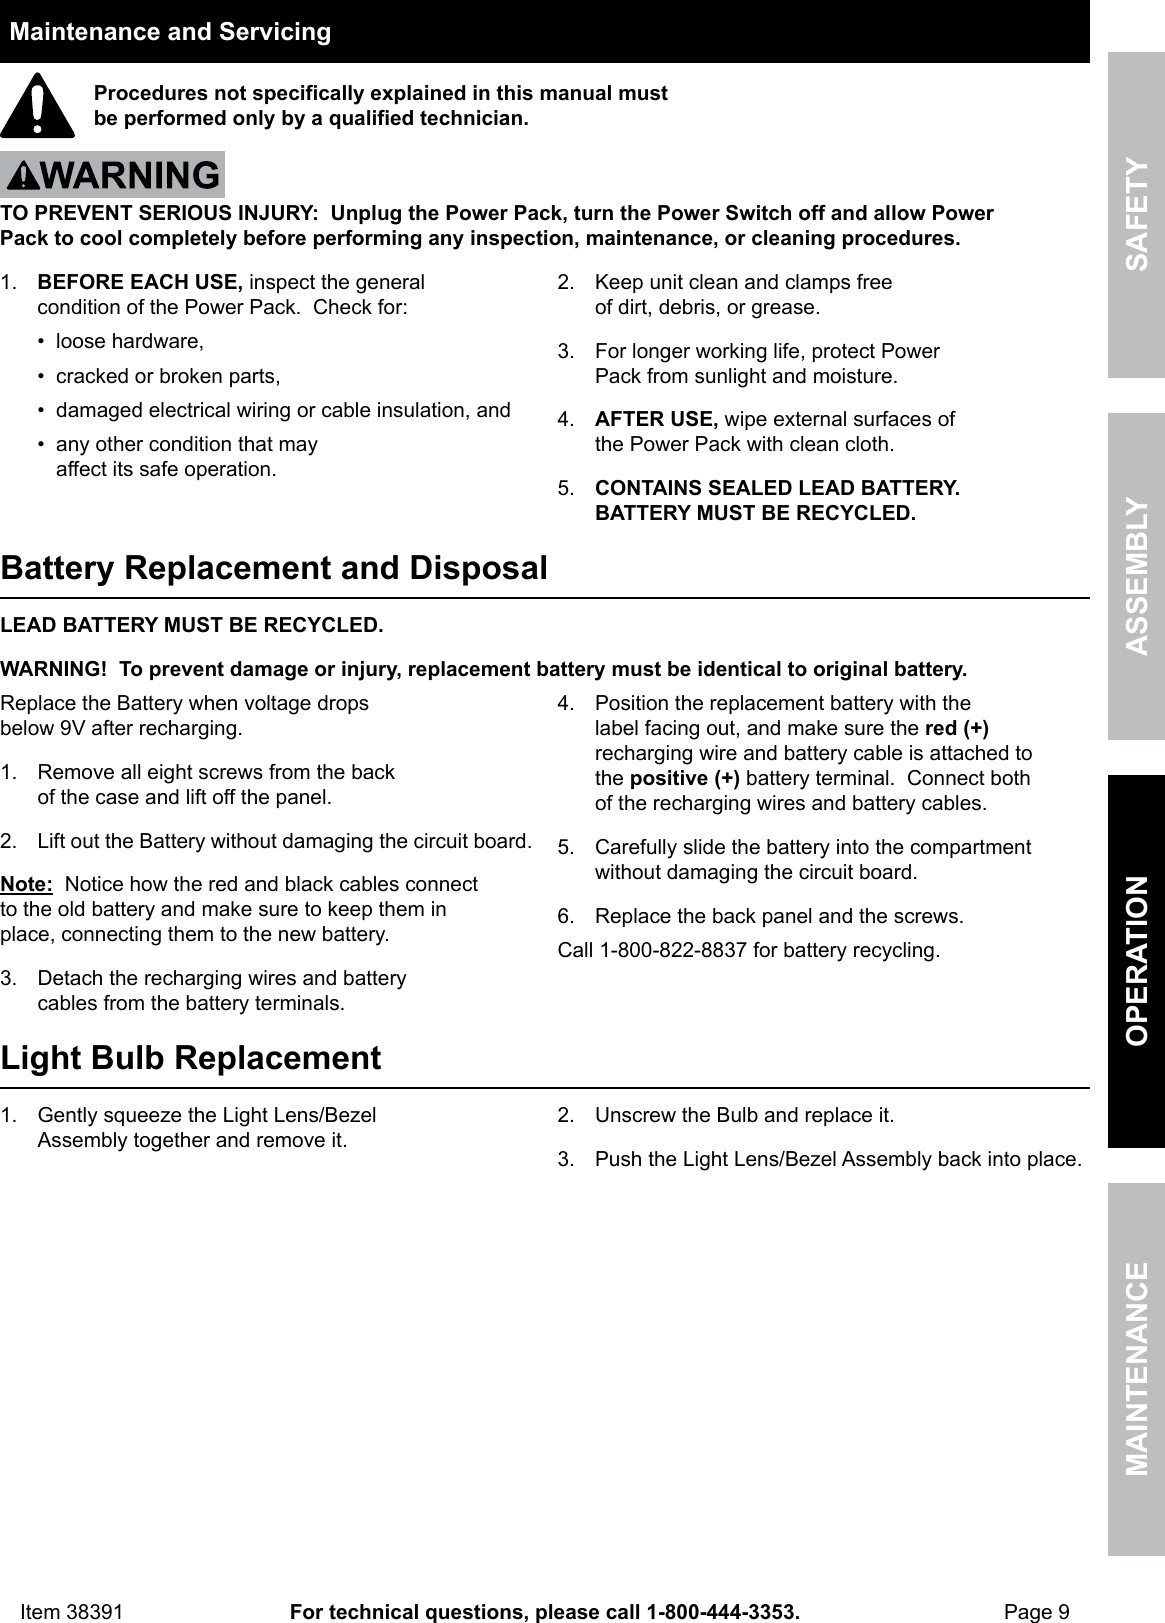 Page 9 of 12 - Harbor-Freight Harbor-Freight-3-In-1-Jump-Starter-And-Power-Supply-Product-Manual-  Harbor-freight-3-in-1-jump-starter-and-power-supply-product-manual